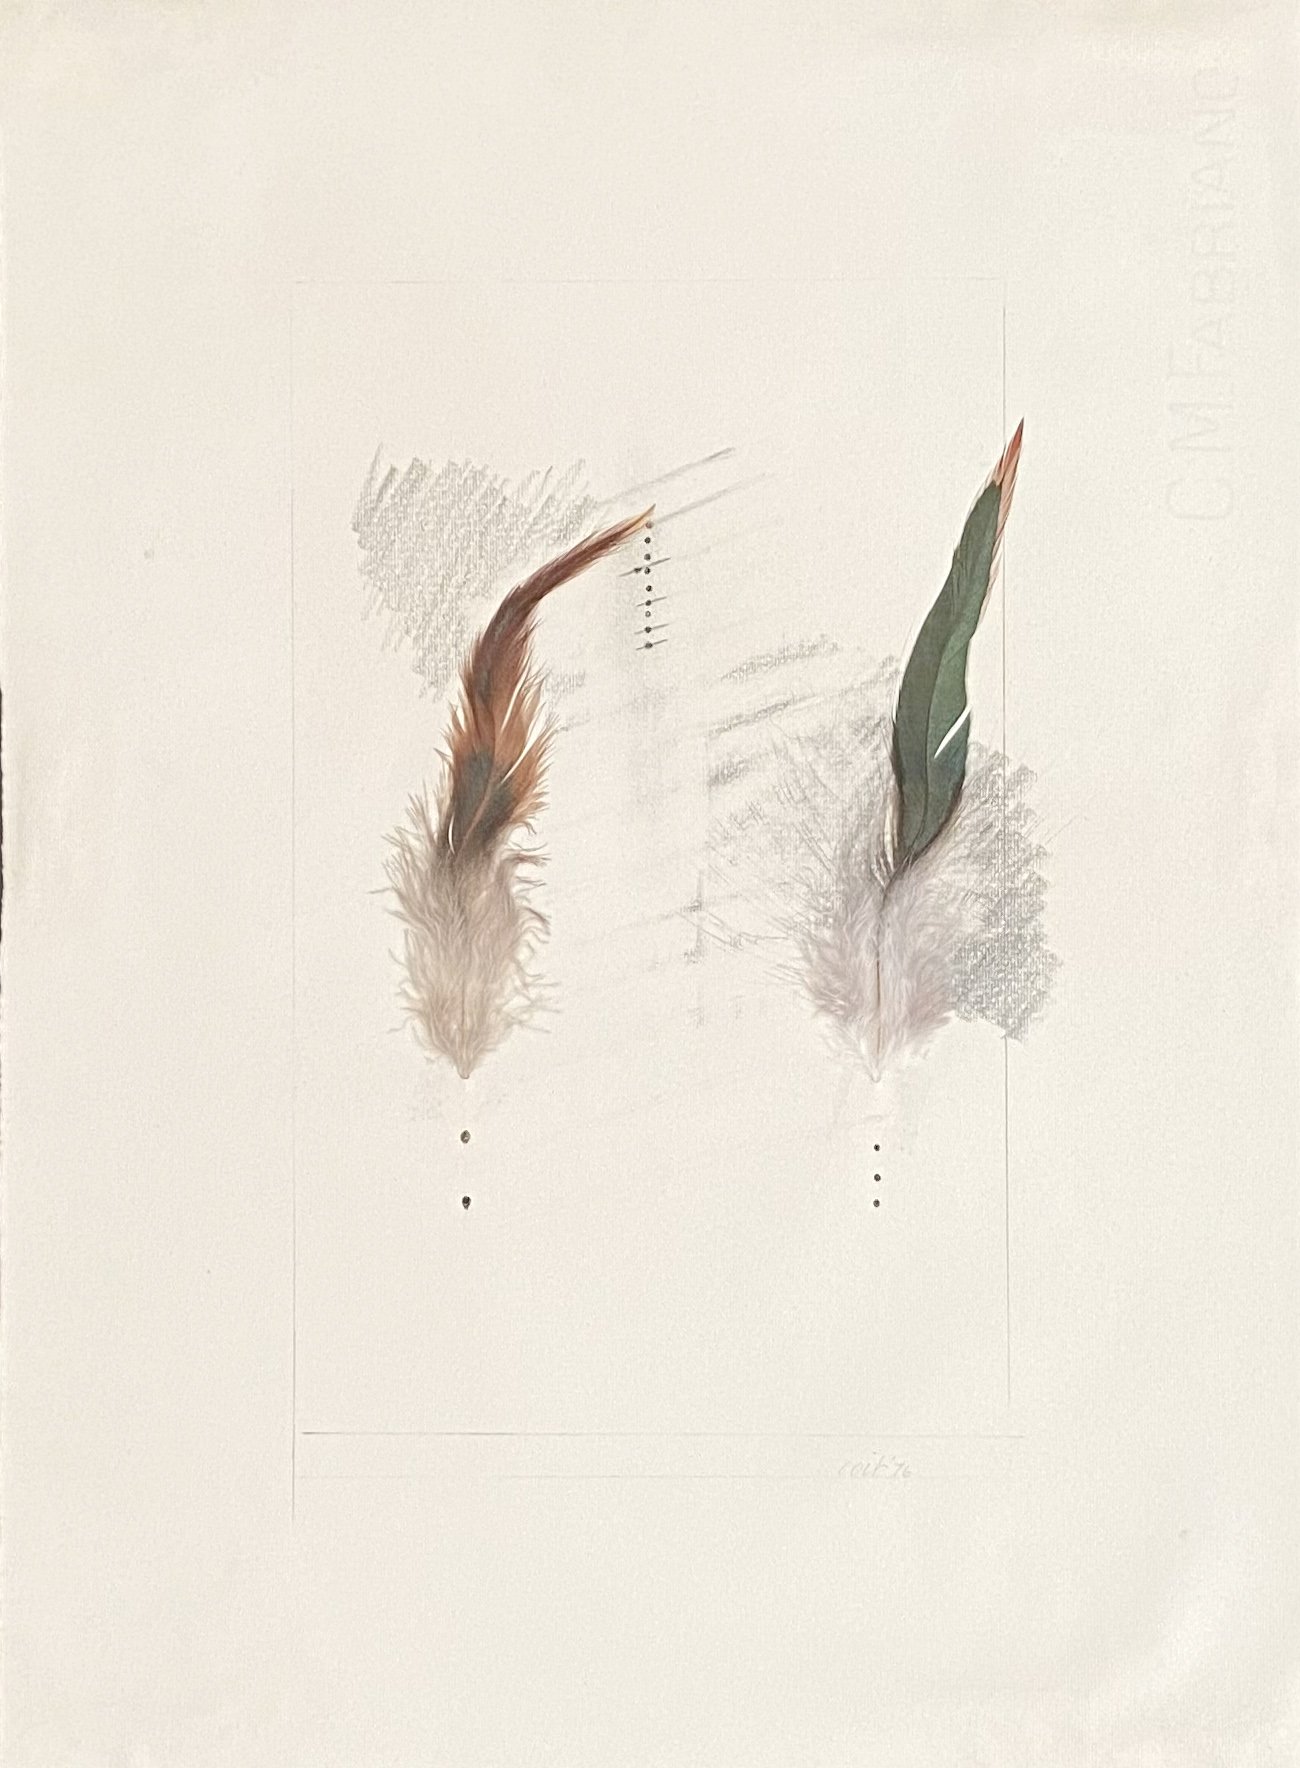 Untitled Feathers #4